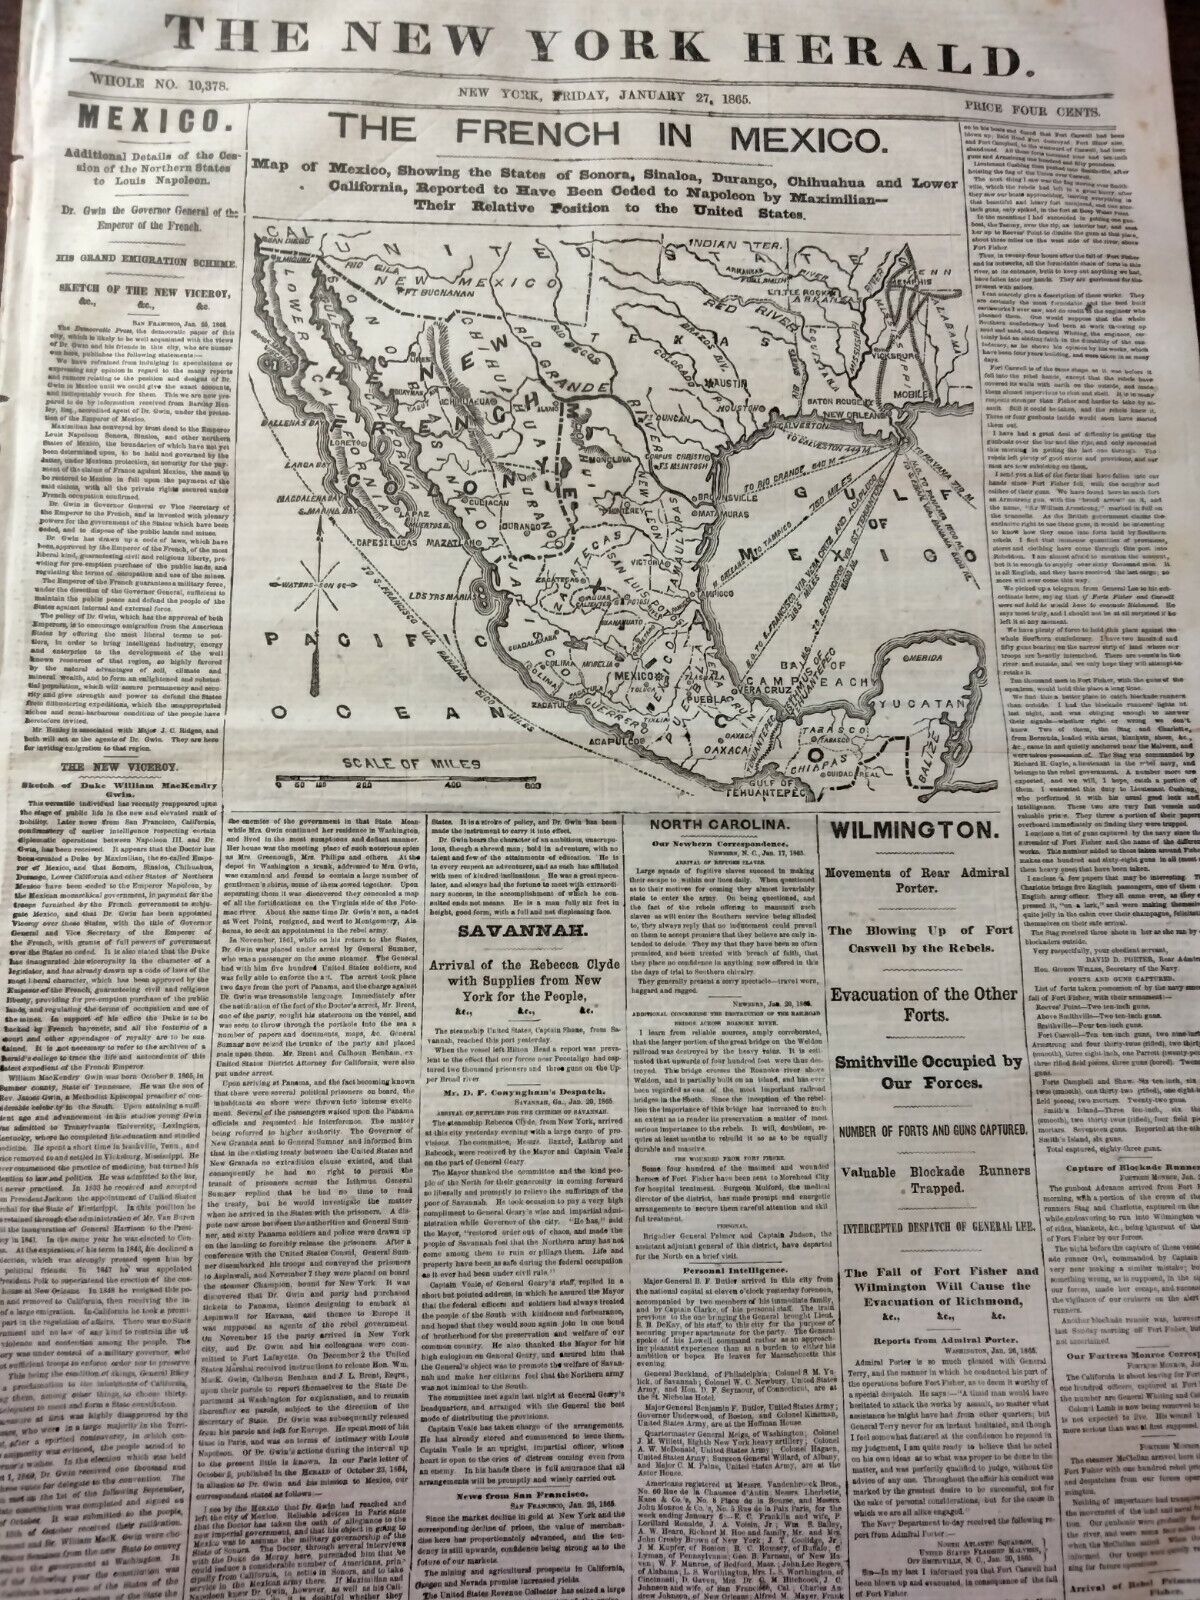 Civil War Newspapers- WILMINGTON-MOVEMENTS OF ADMIRAL PORTER, THE PEACE MISSION